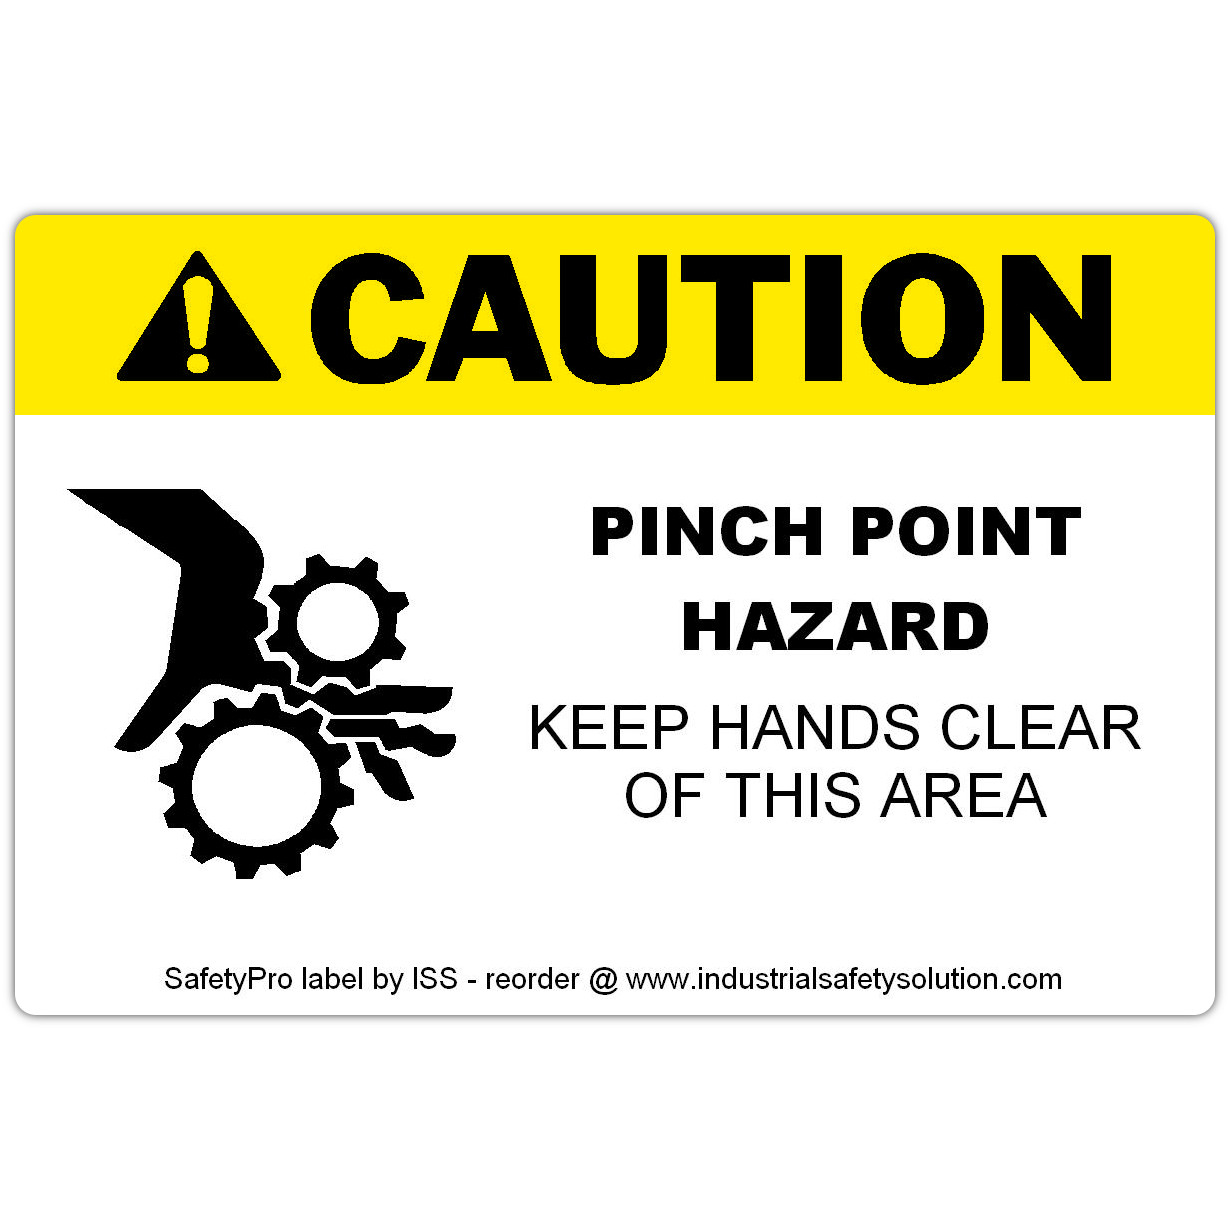 Detail view for 4" x 6" CAUTION Pinch Point Safety Label